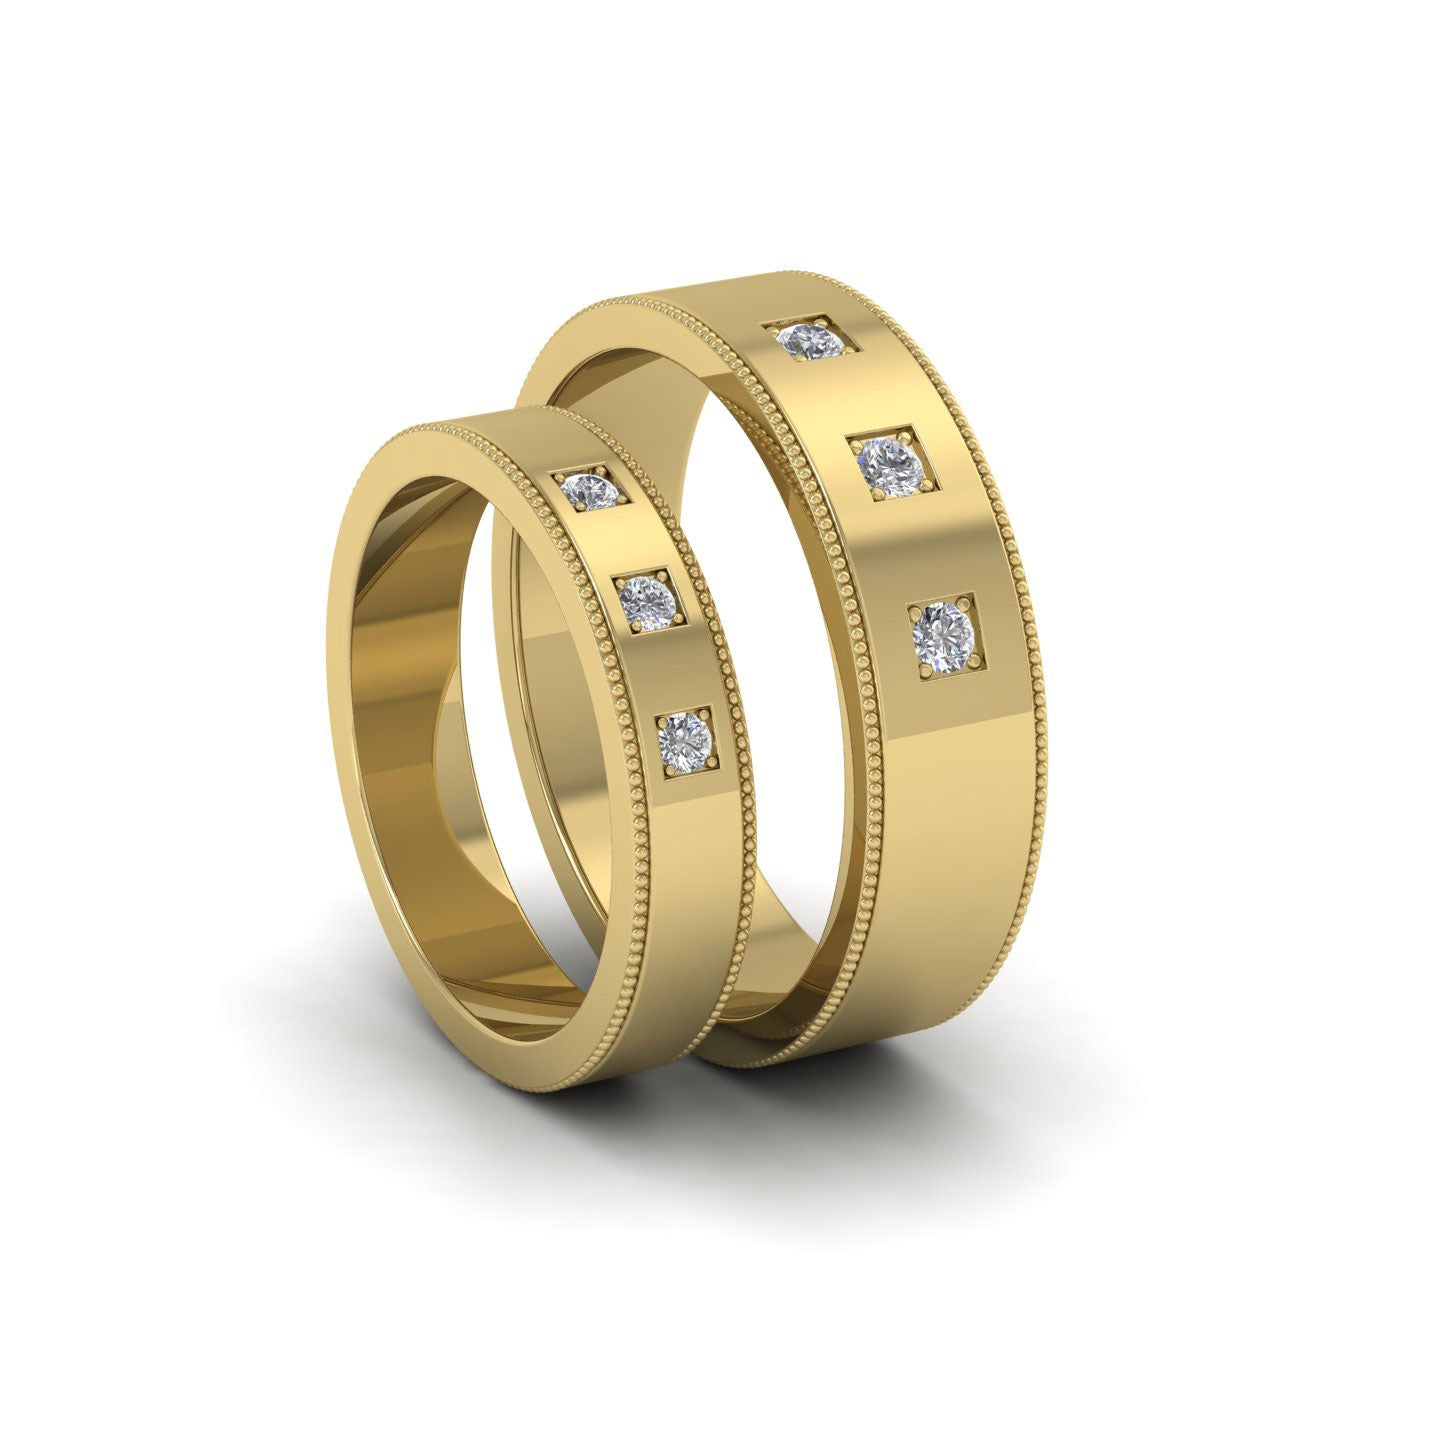 Three Diamonds With Square Setting 9ct Yellow Gold 6mm Wedding Ring With Millgrain Edge